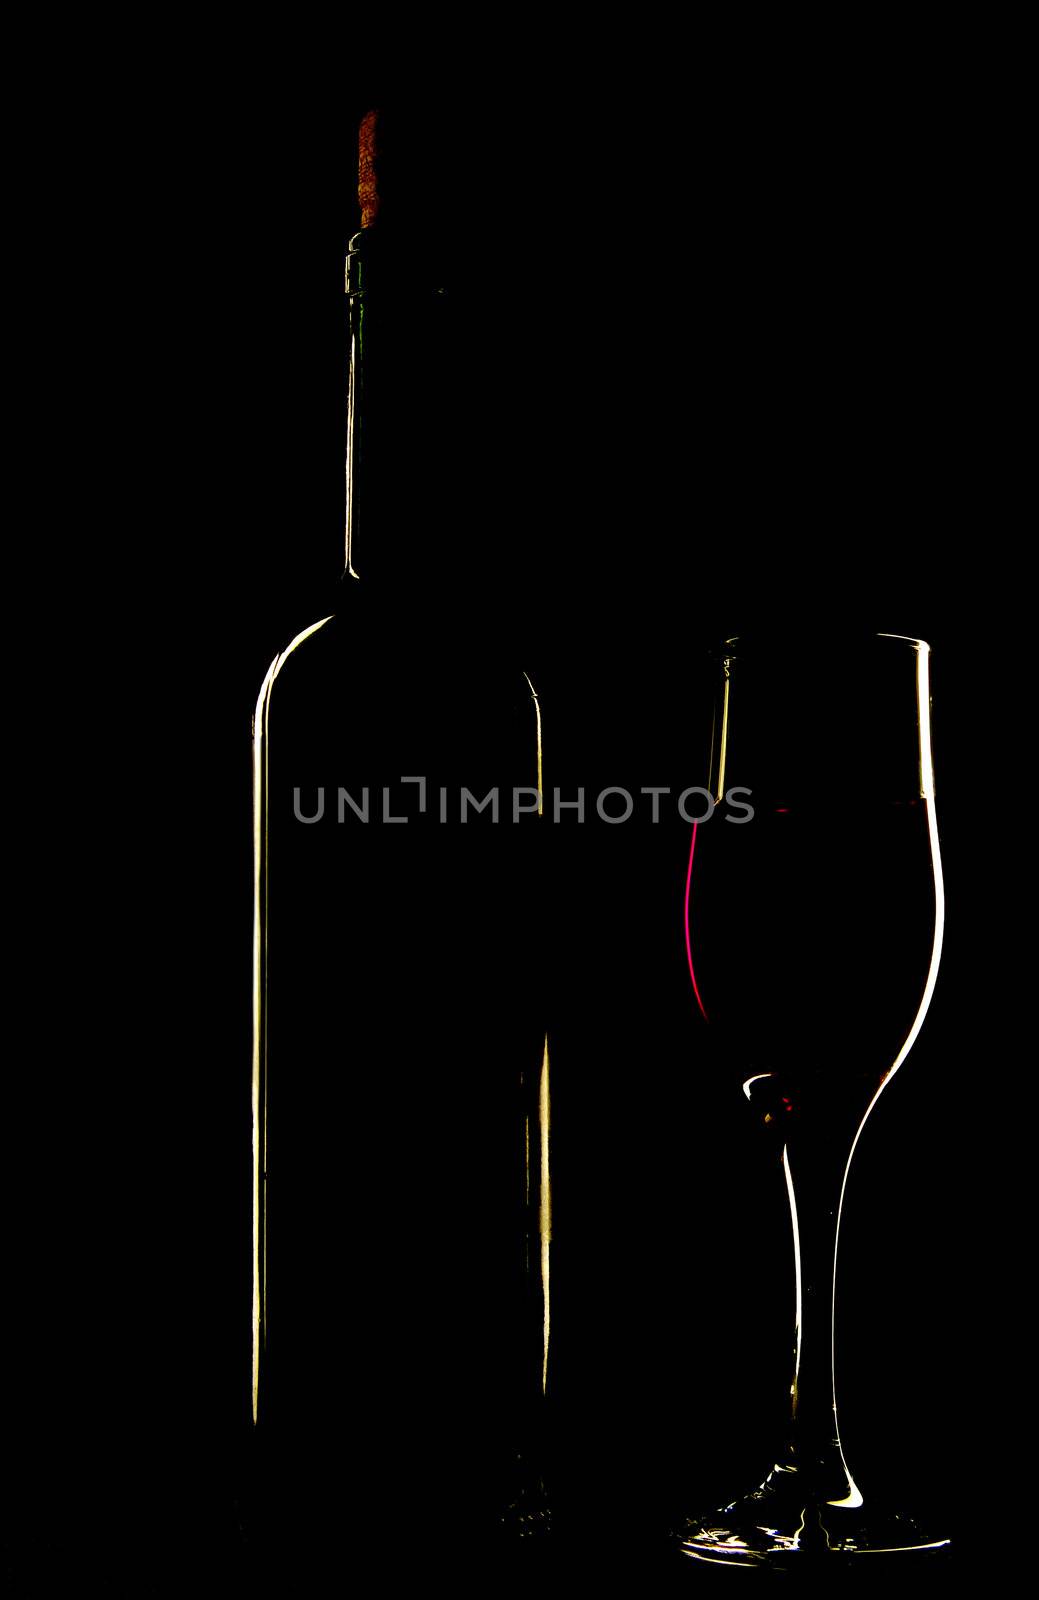 light silhouette of bottle and wineglass